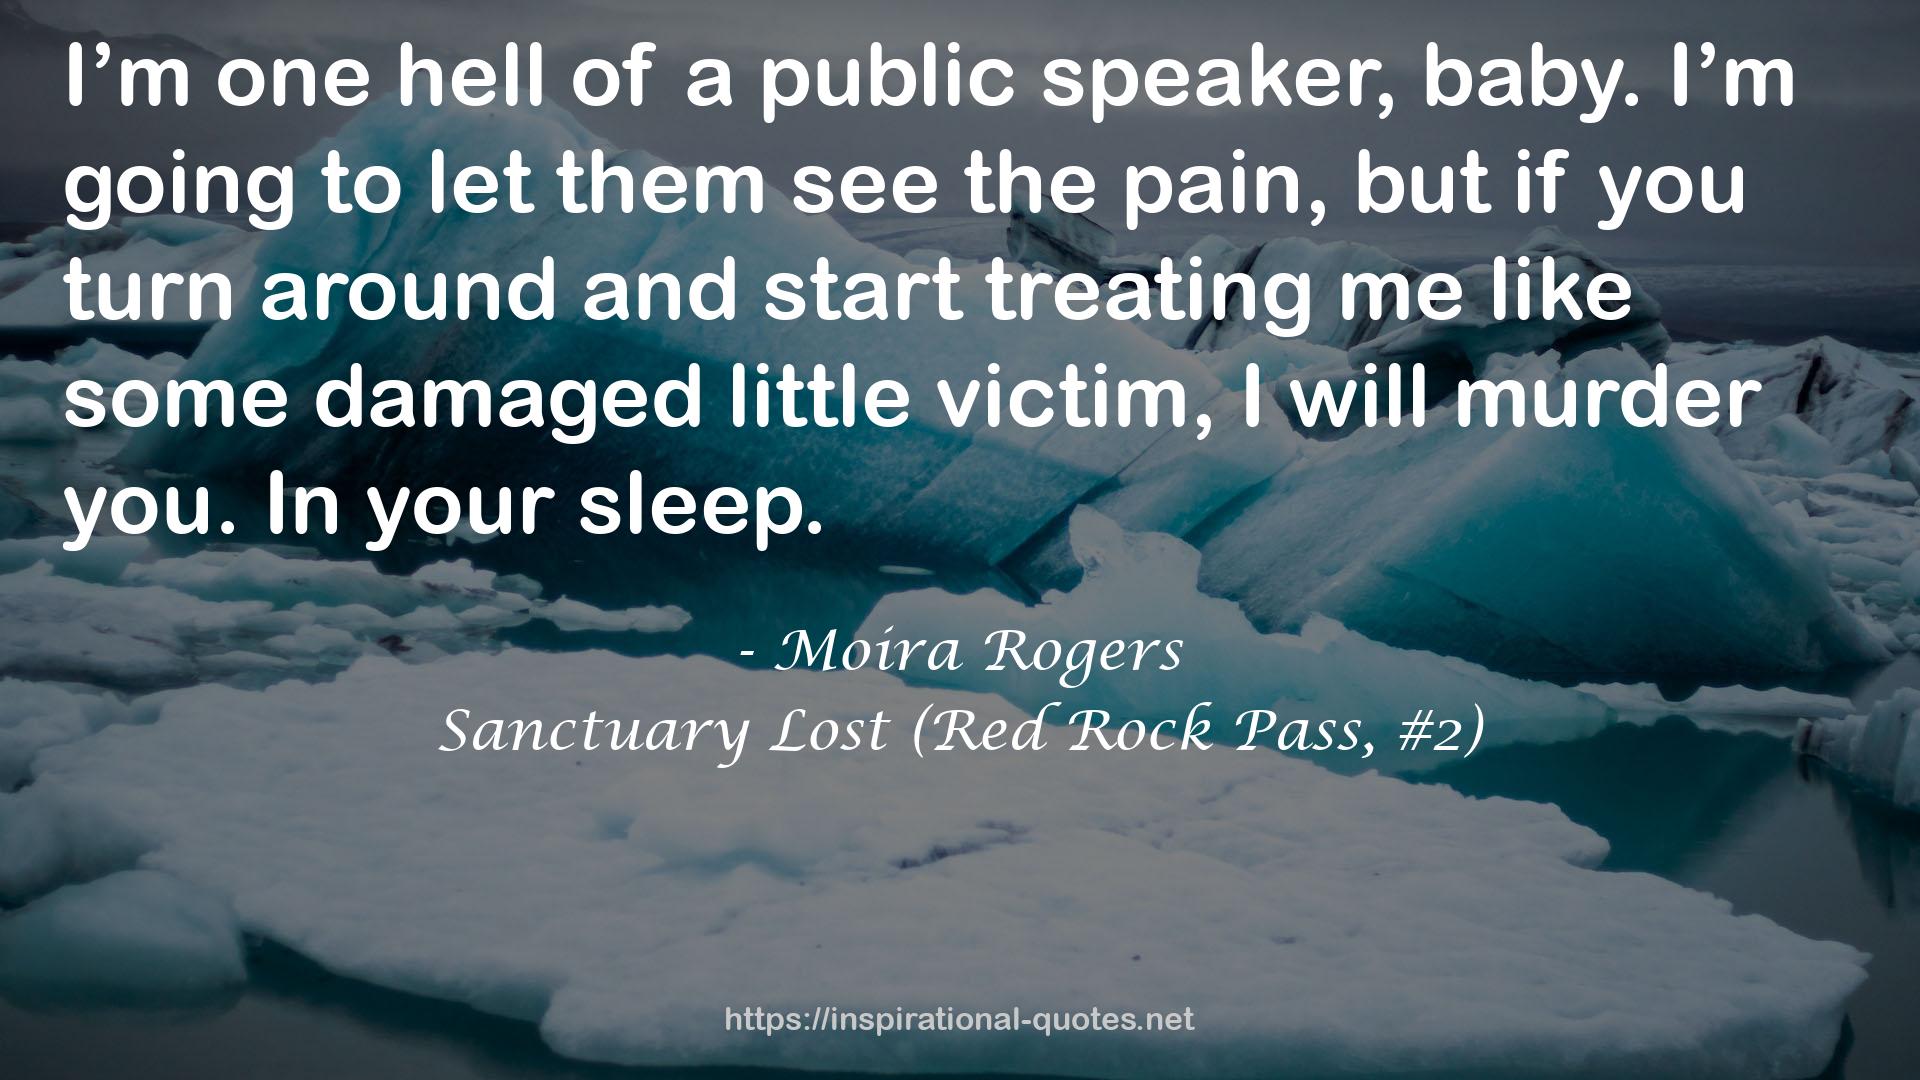 Sanctuary Lost (Red Rock Pass, #2) QUOTES